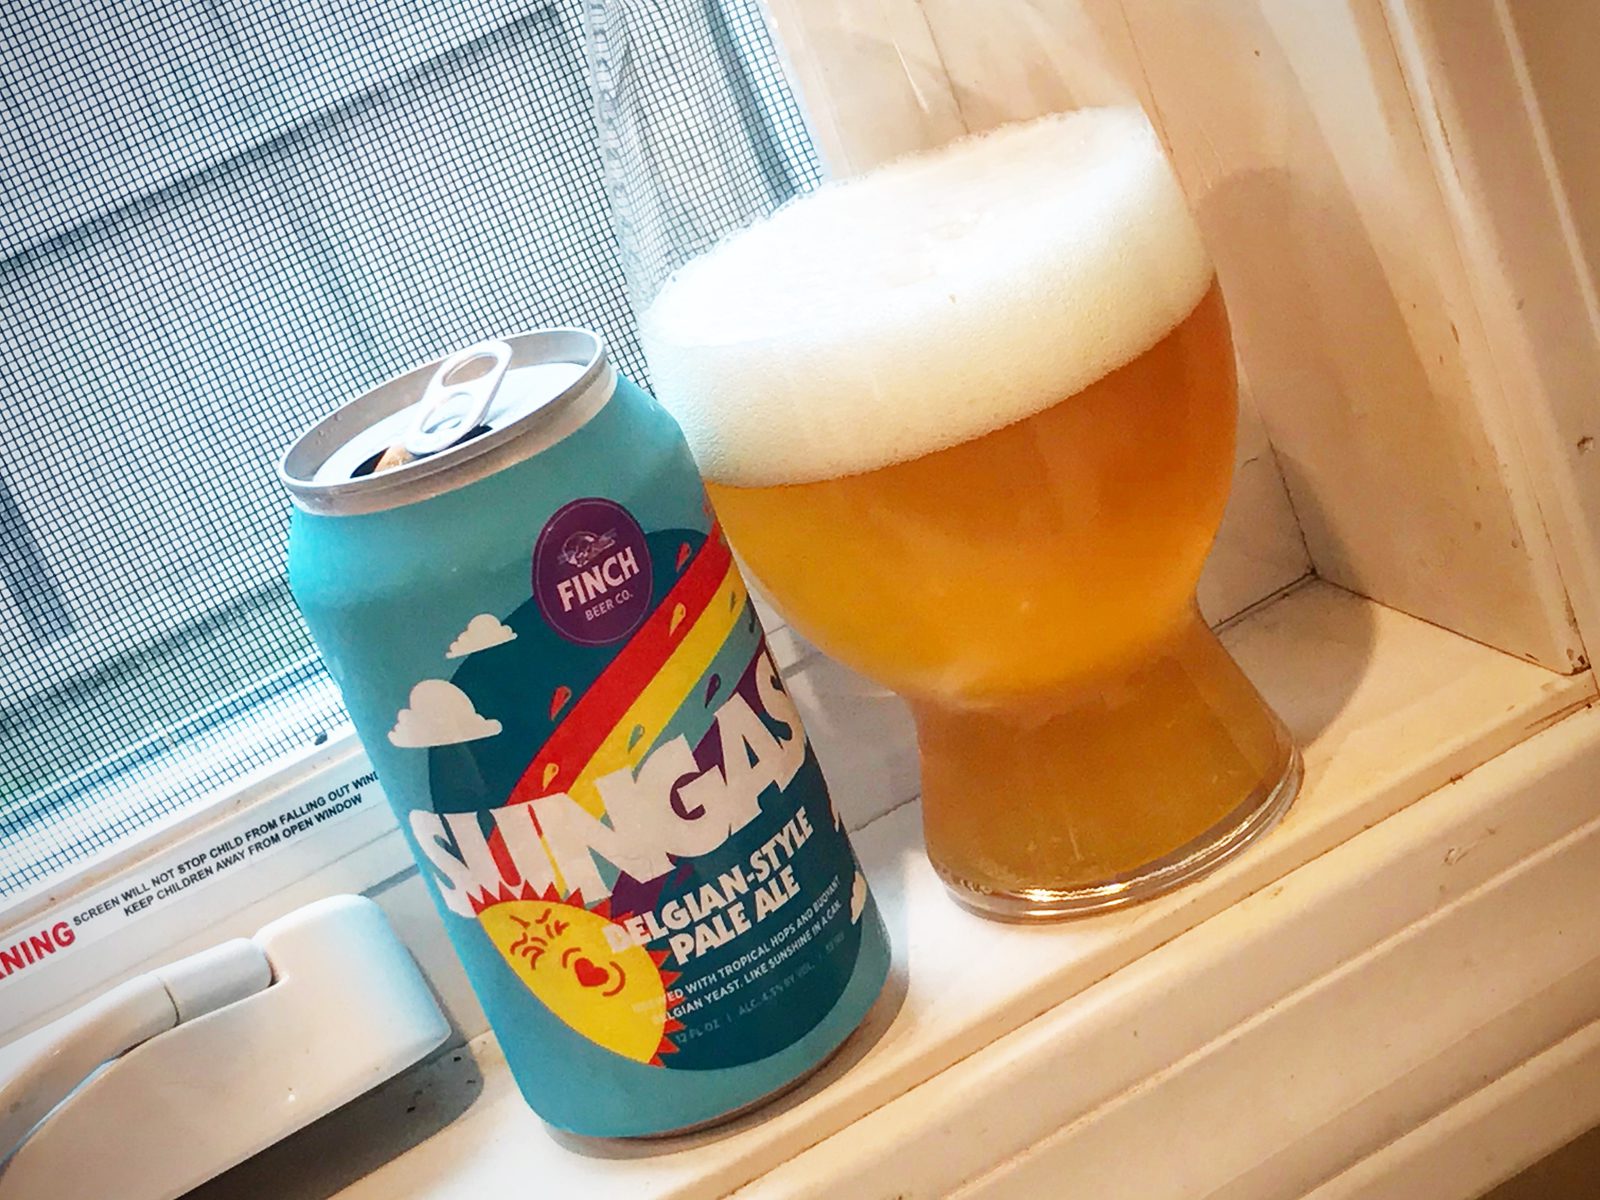 Finch Beer Company: Sungasm